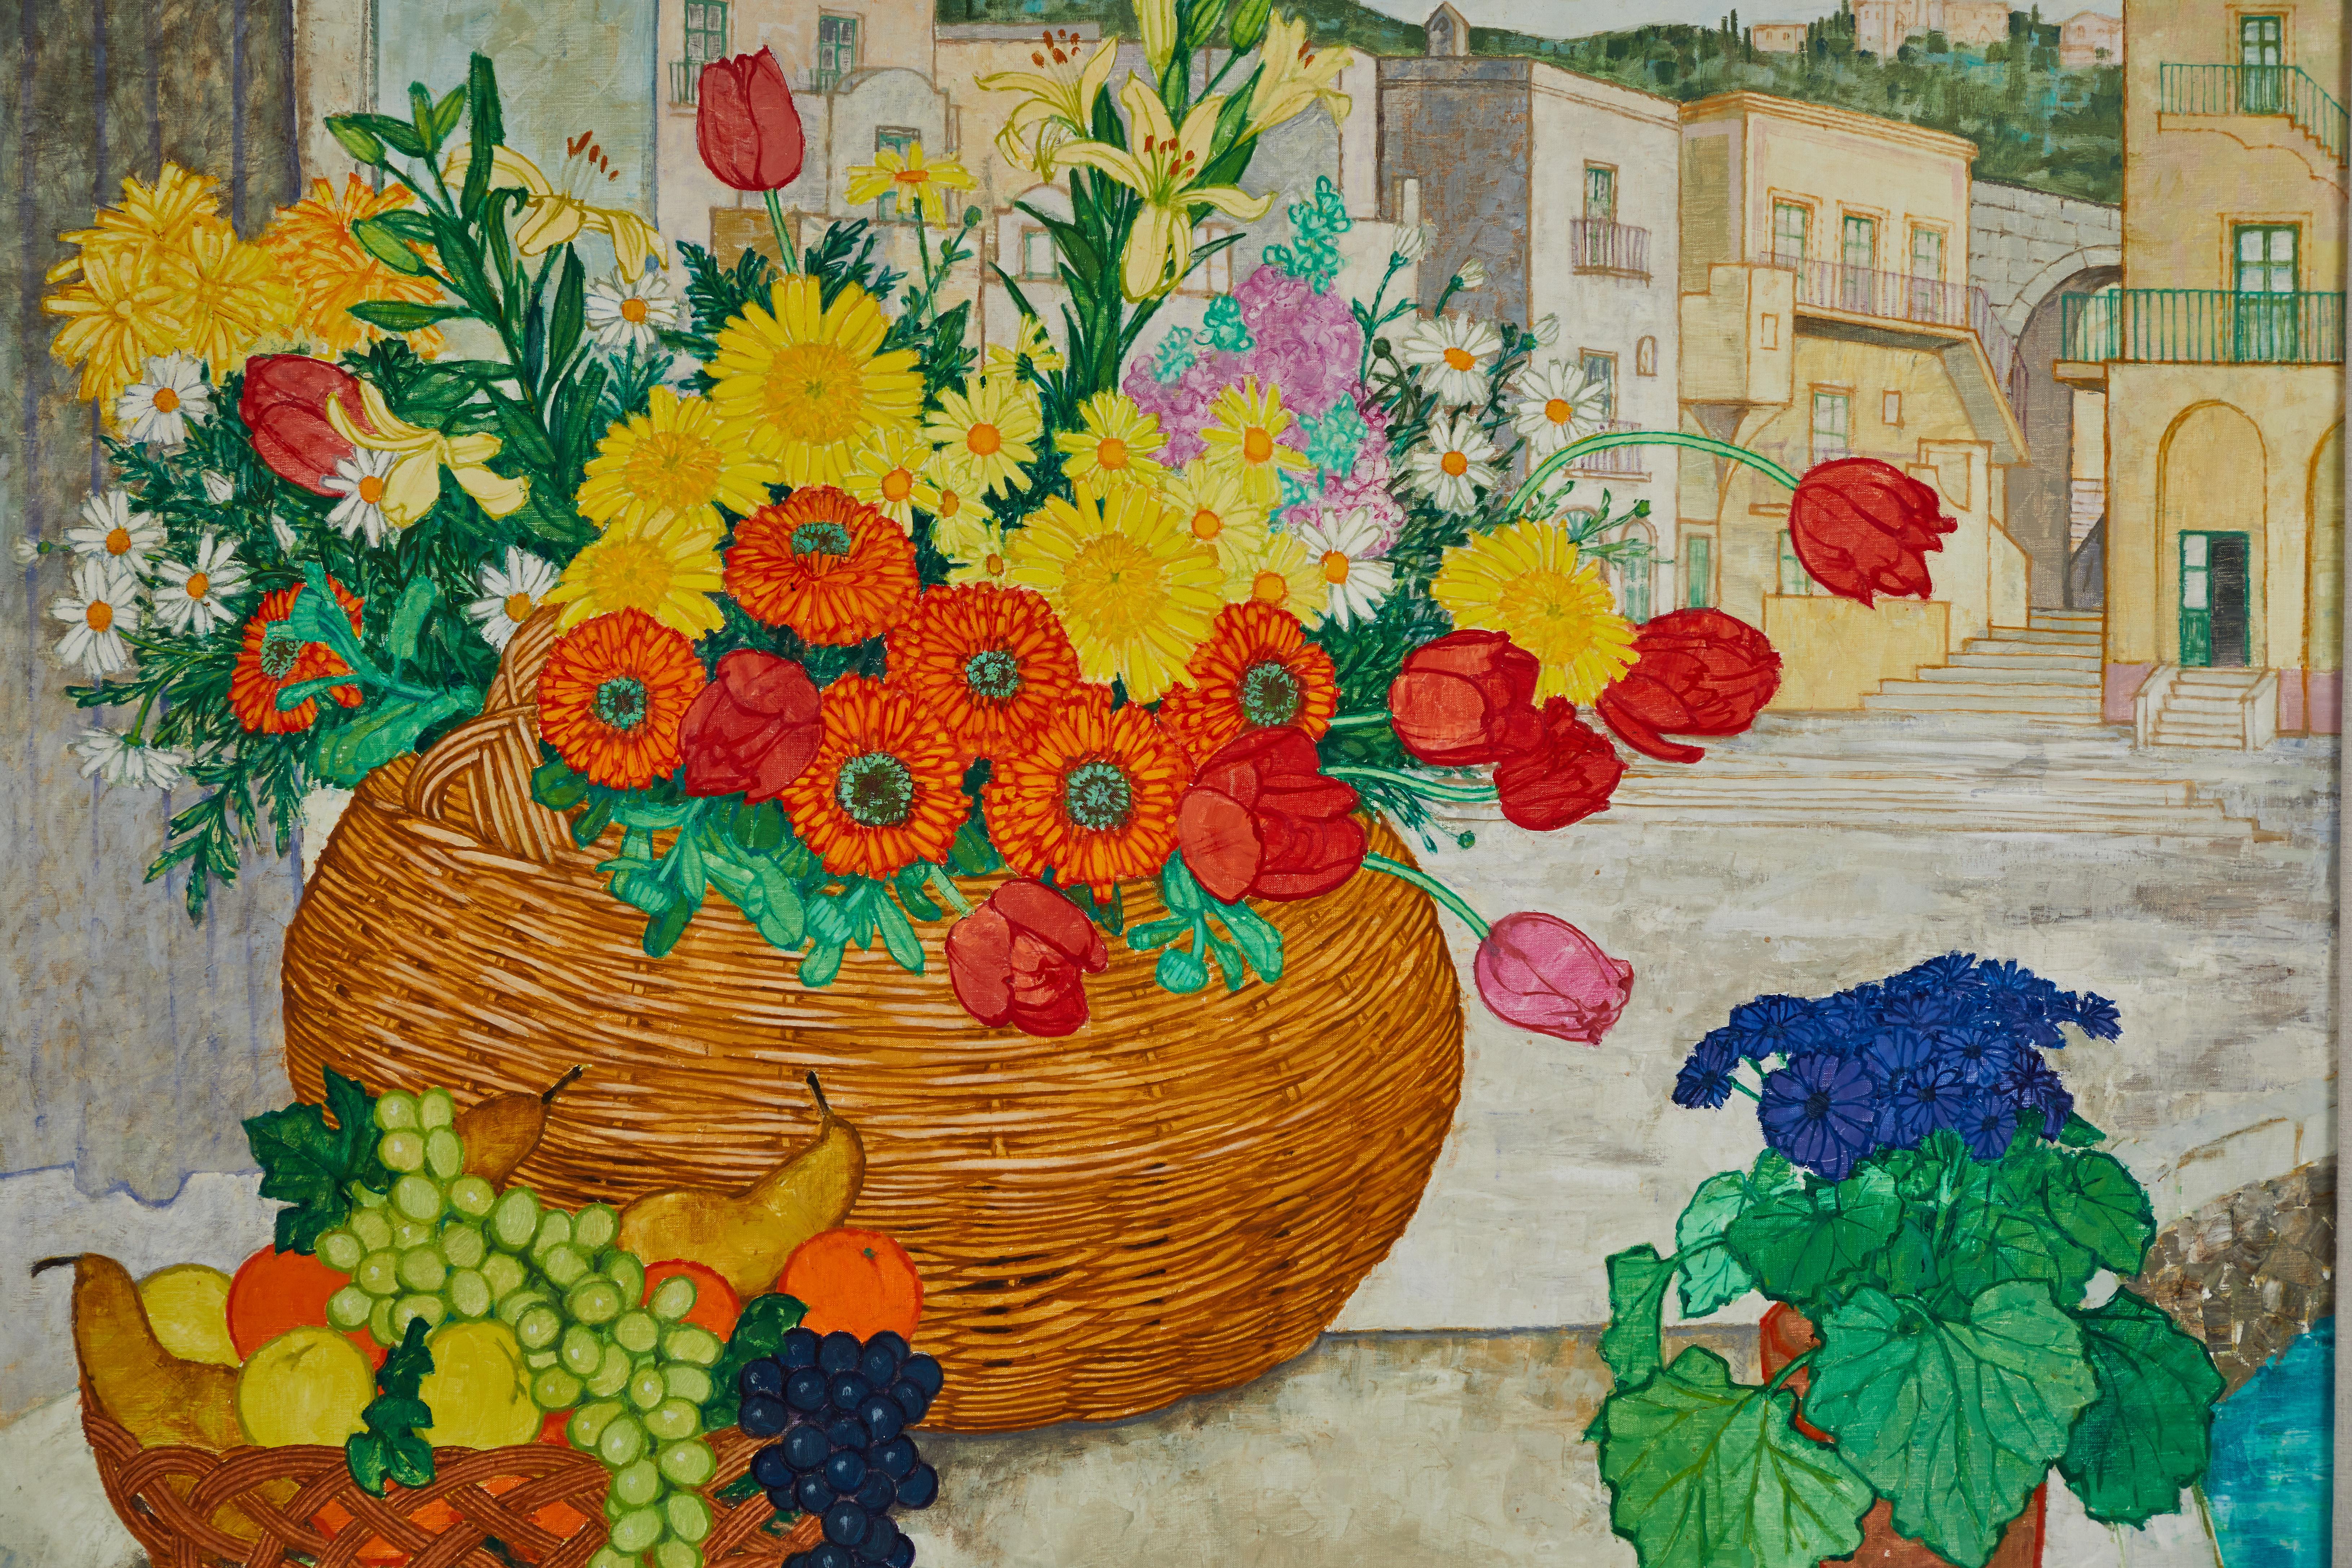 This signed painting by Frederick Jessup (1920-2007), depicts a floral and fruit arrangement in a basket in a quaint village. The wooden frame has a gold finish. This artwork is from the collection of Lee Philip Bell, the co-creator of The Young and